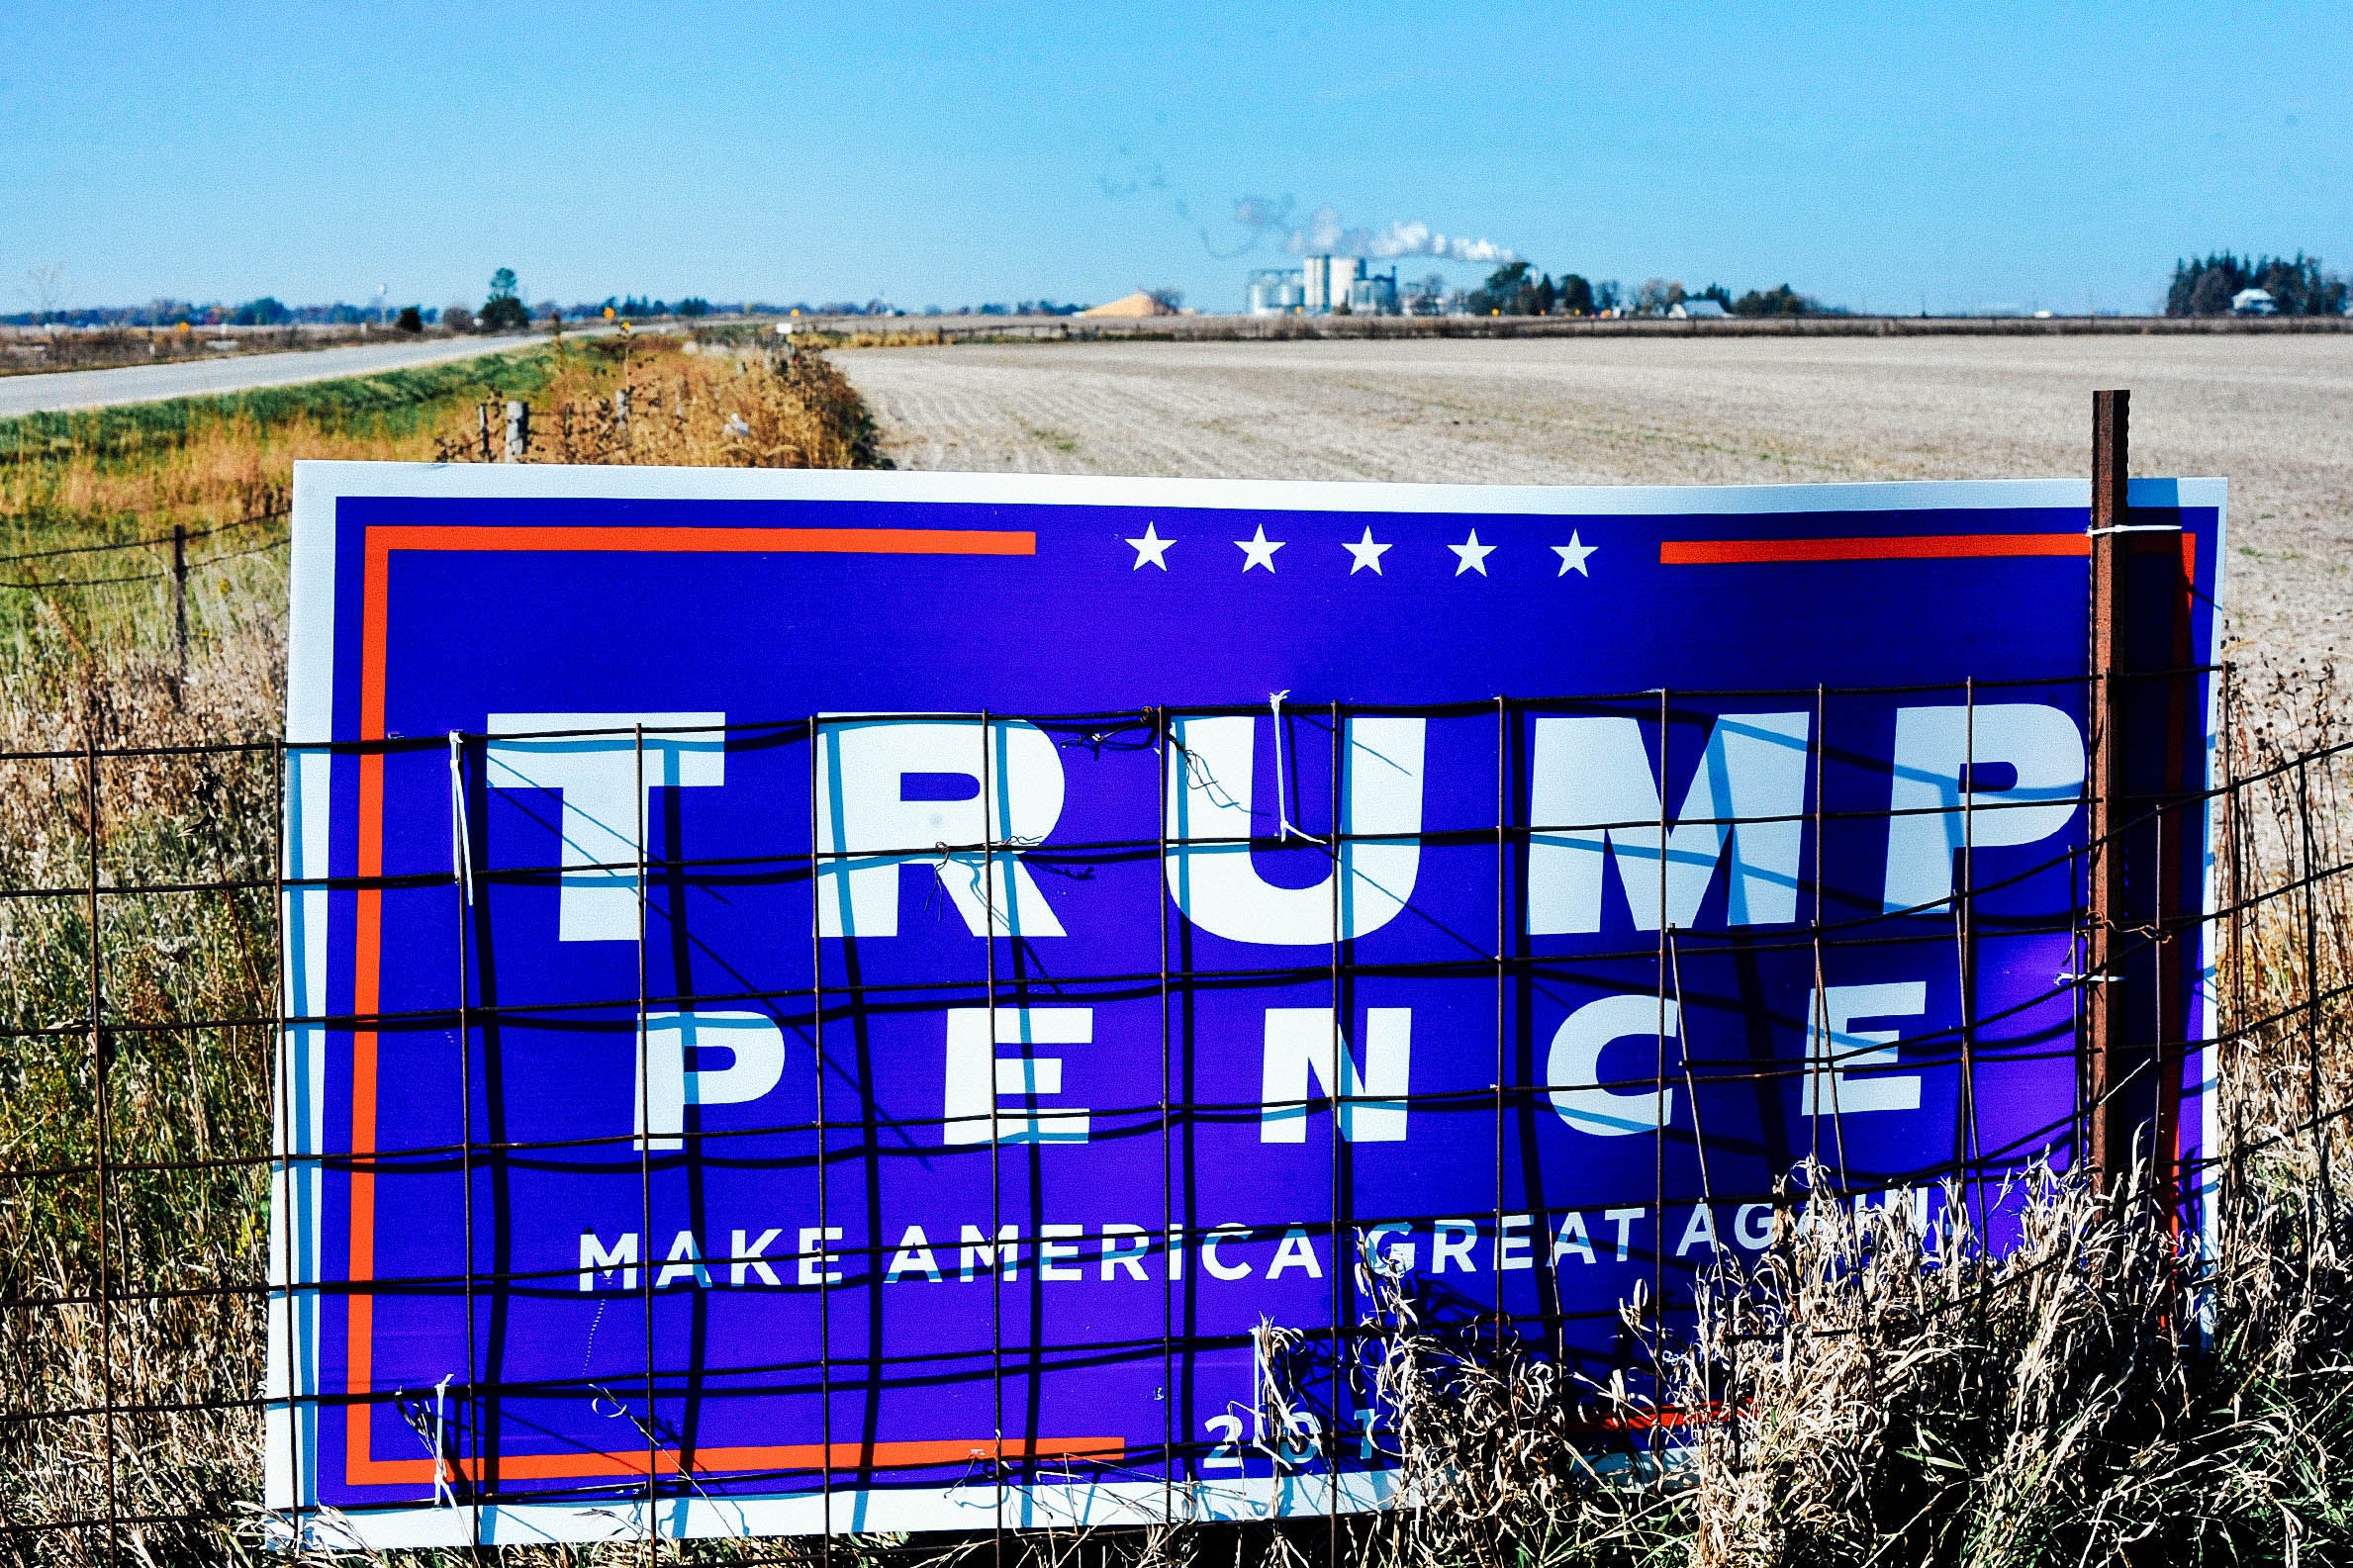 A Trump-Pence sign in front of a field.